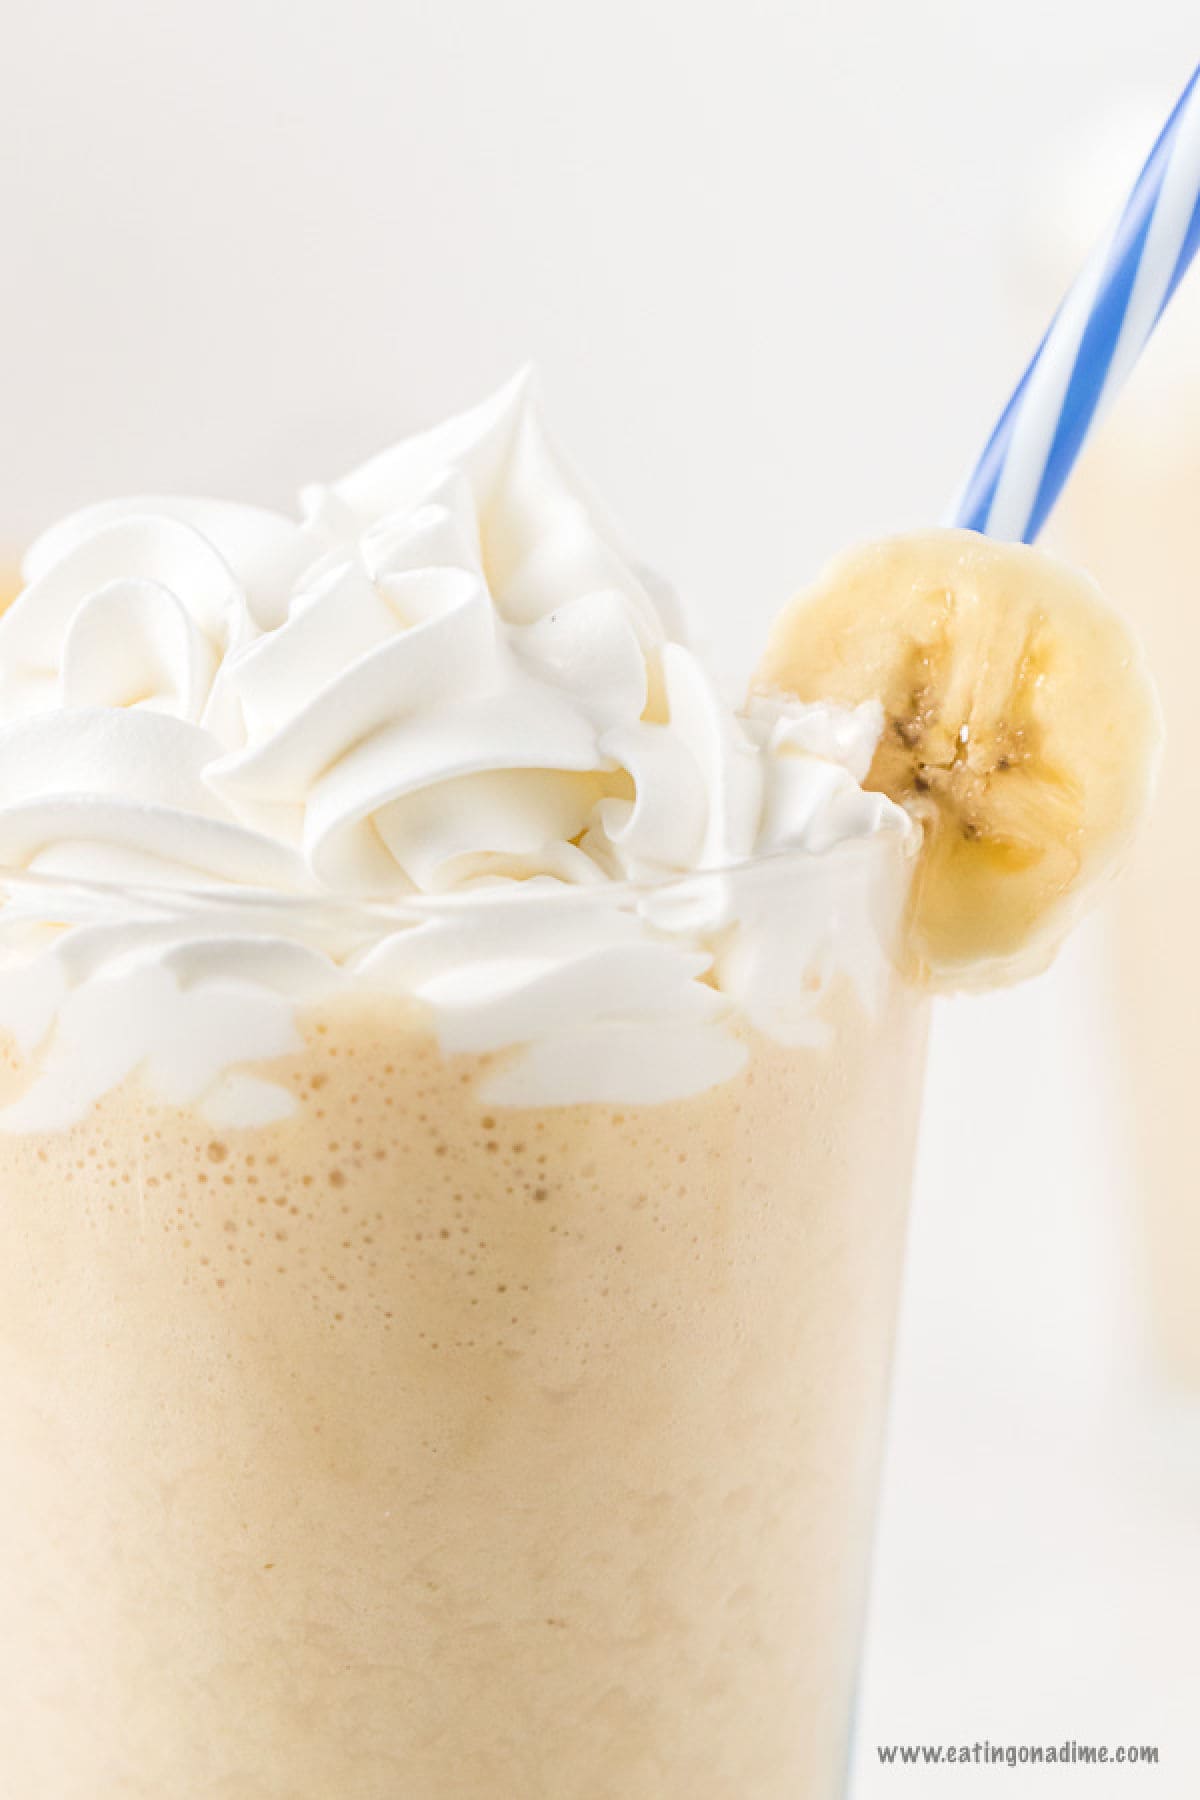 Peanut butter banana smoothie in a glass topped with a banana slice and whipped cream with a blue and white straw